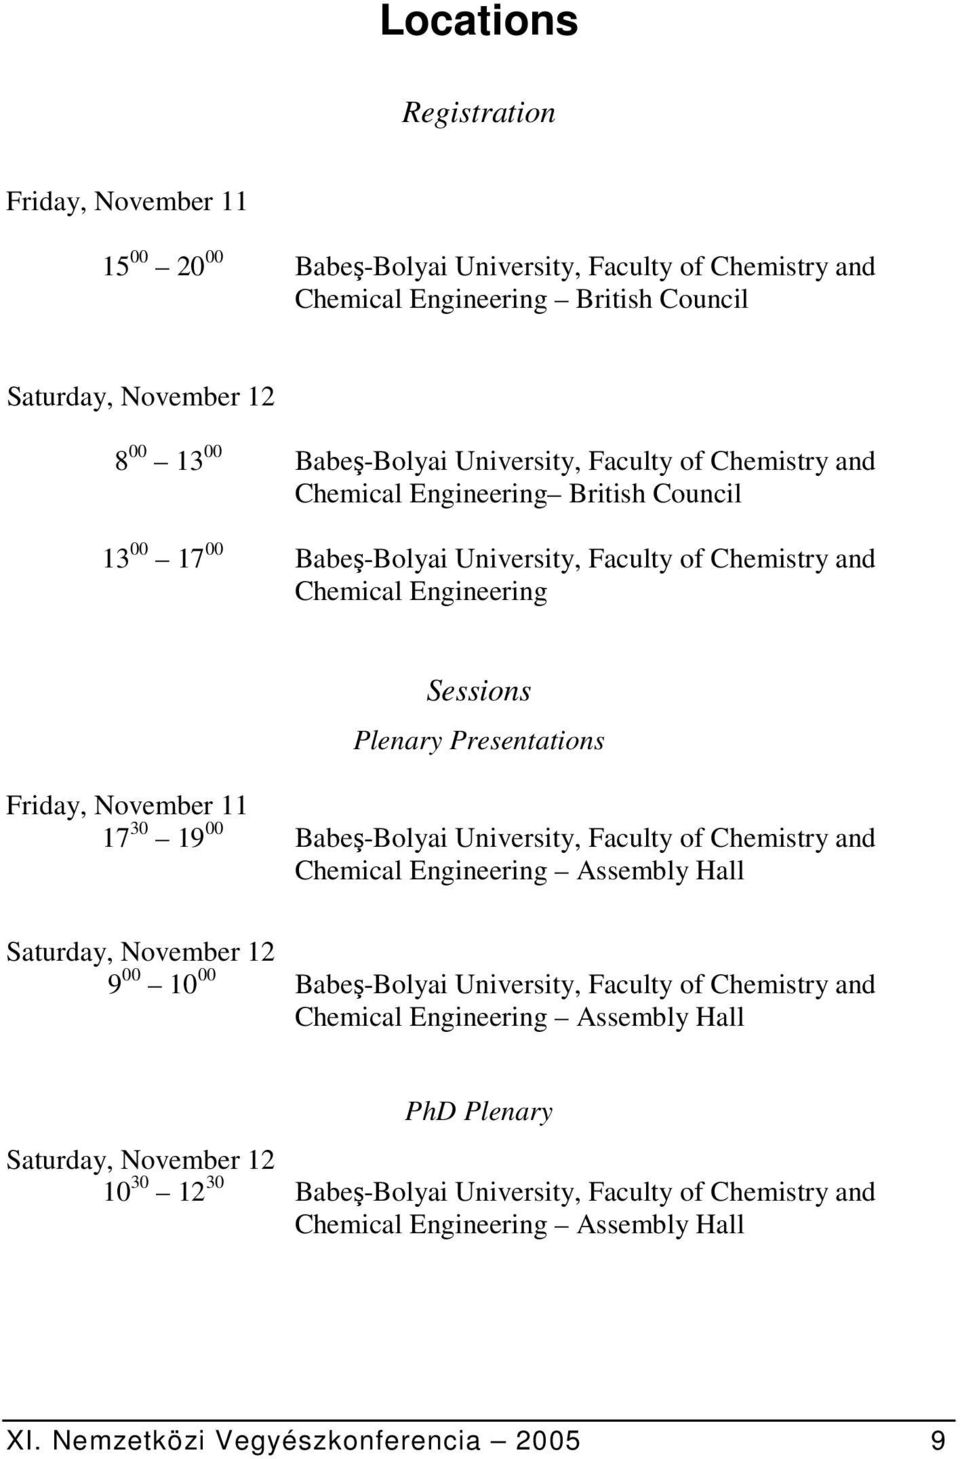 November 11 17 30 19 00 Babeş-Bolyai University, Faculty of Chemistry and Chemical Engineering Assembly Hall Saturday, November 12 9 00 10 00 Babeş-Bolyai University, Faculty of Chemistry and